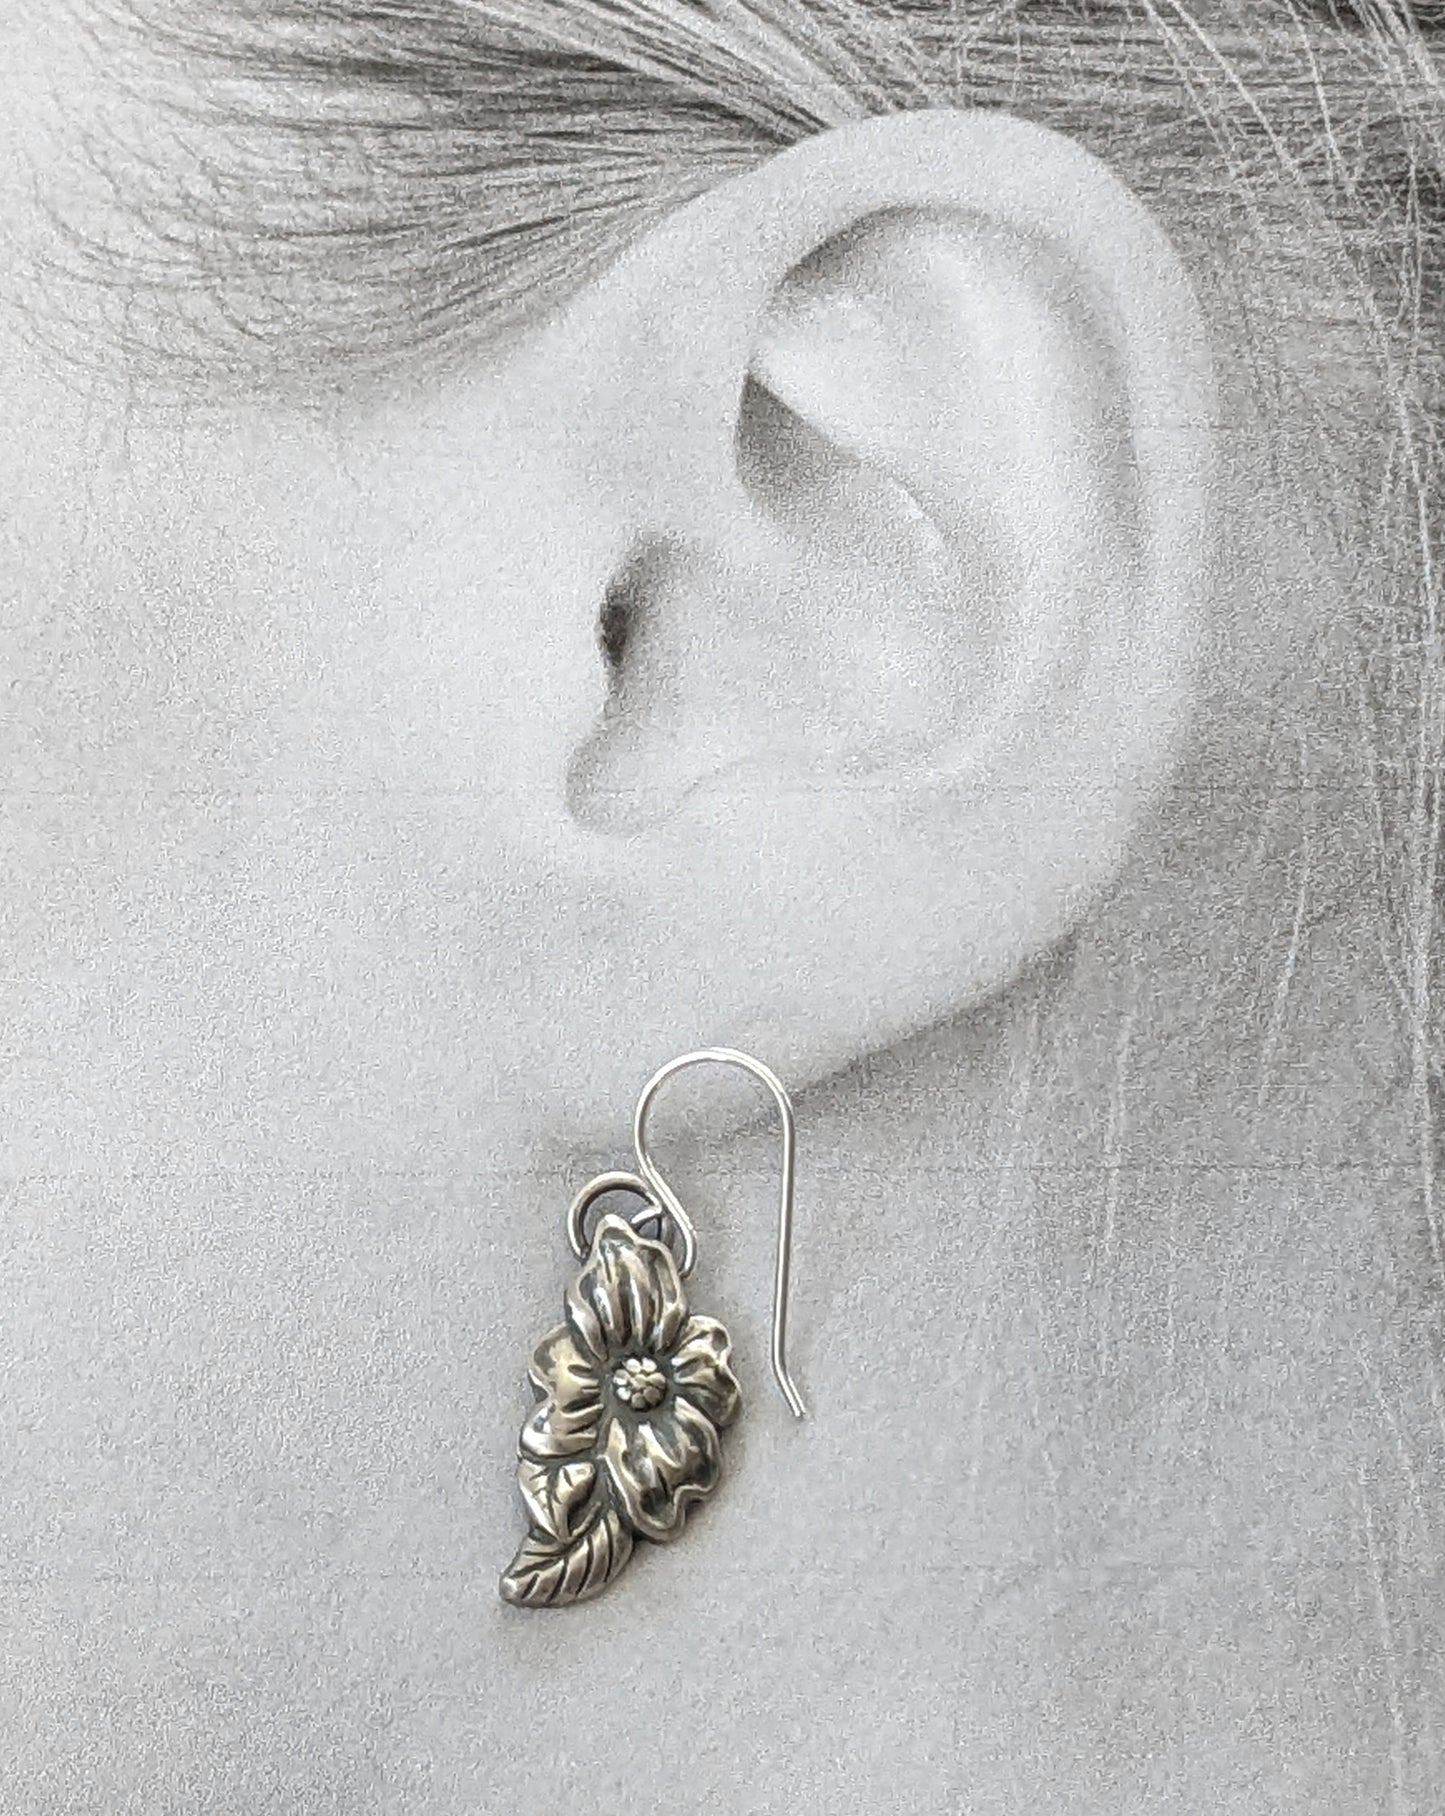 Stering silver dogwood flower earrings. The Design is asymmetric, the left earring has a leaf above the flower and the right earring has a leaf below the flower. Shown modeled on picture of a womans ear